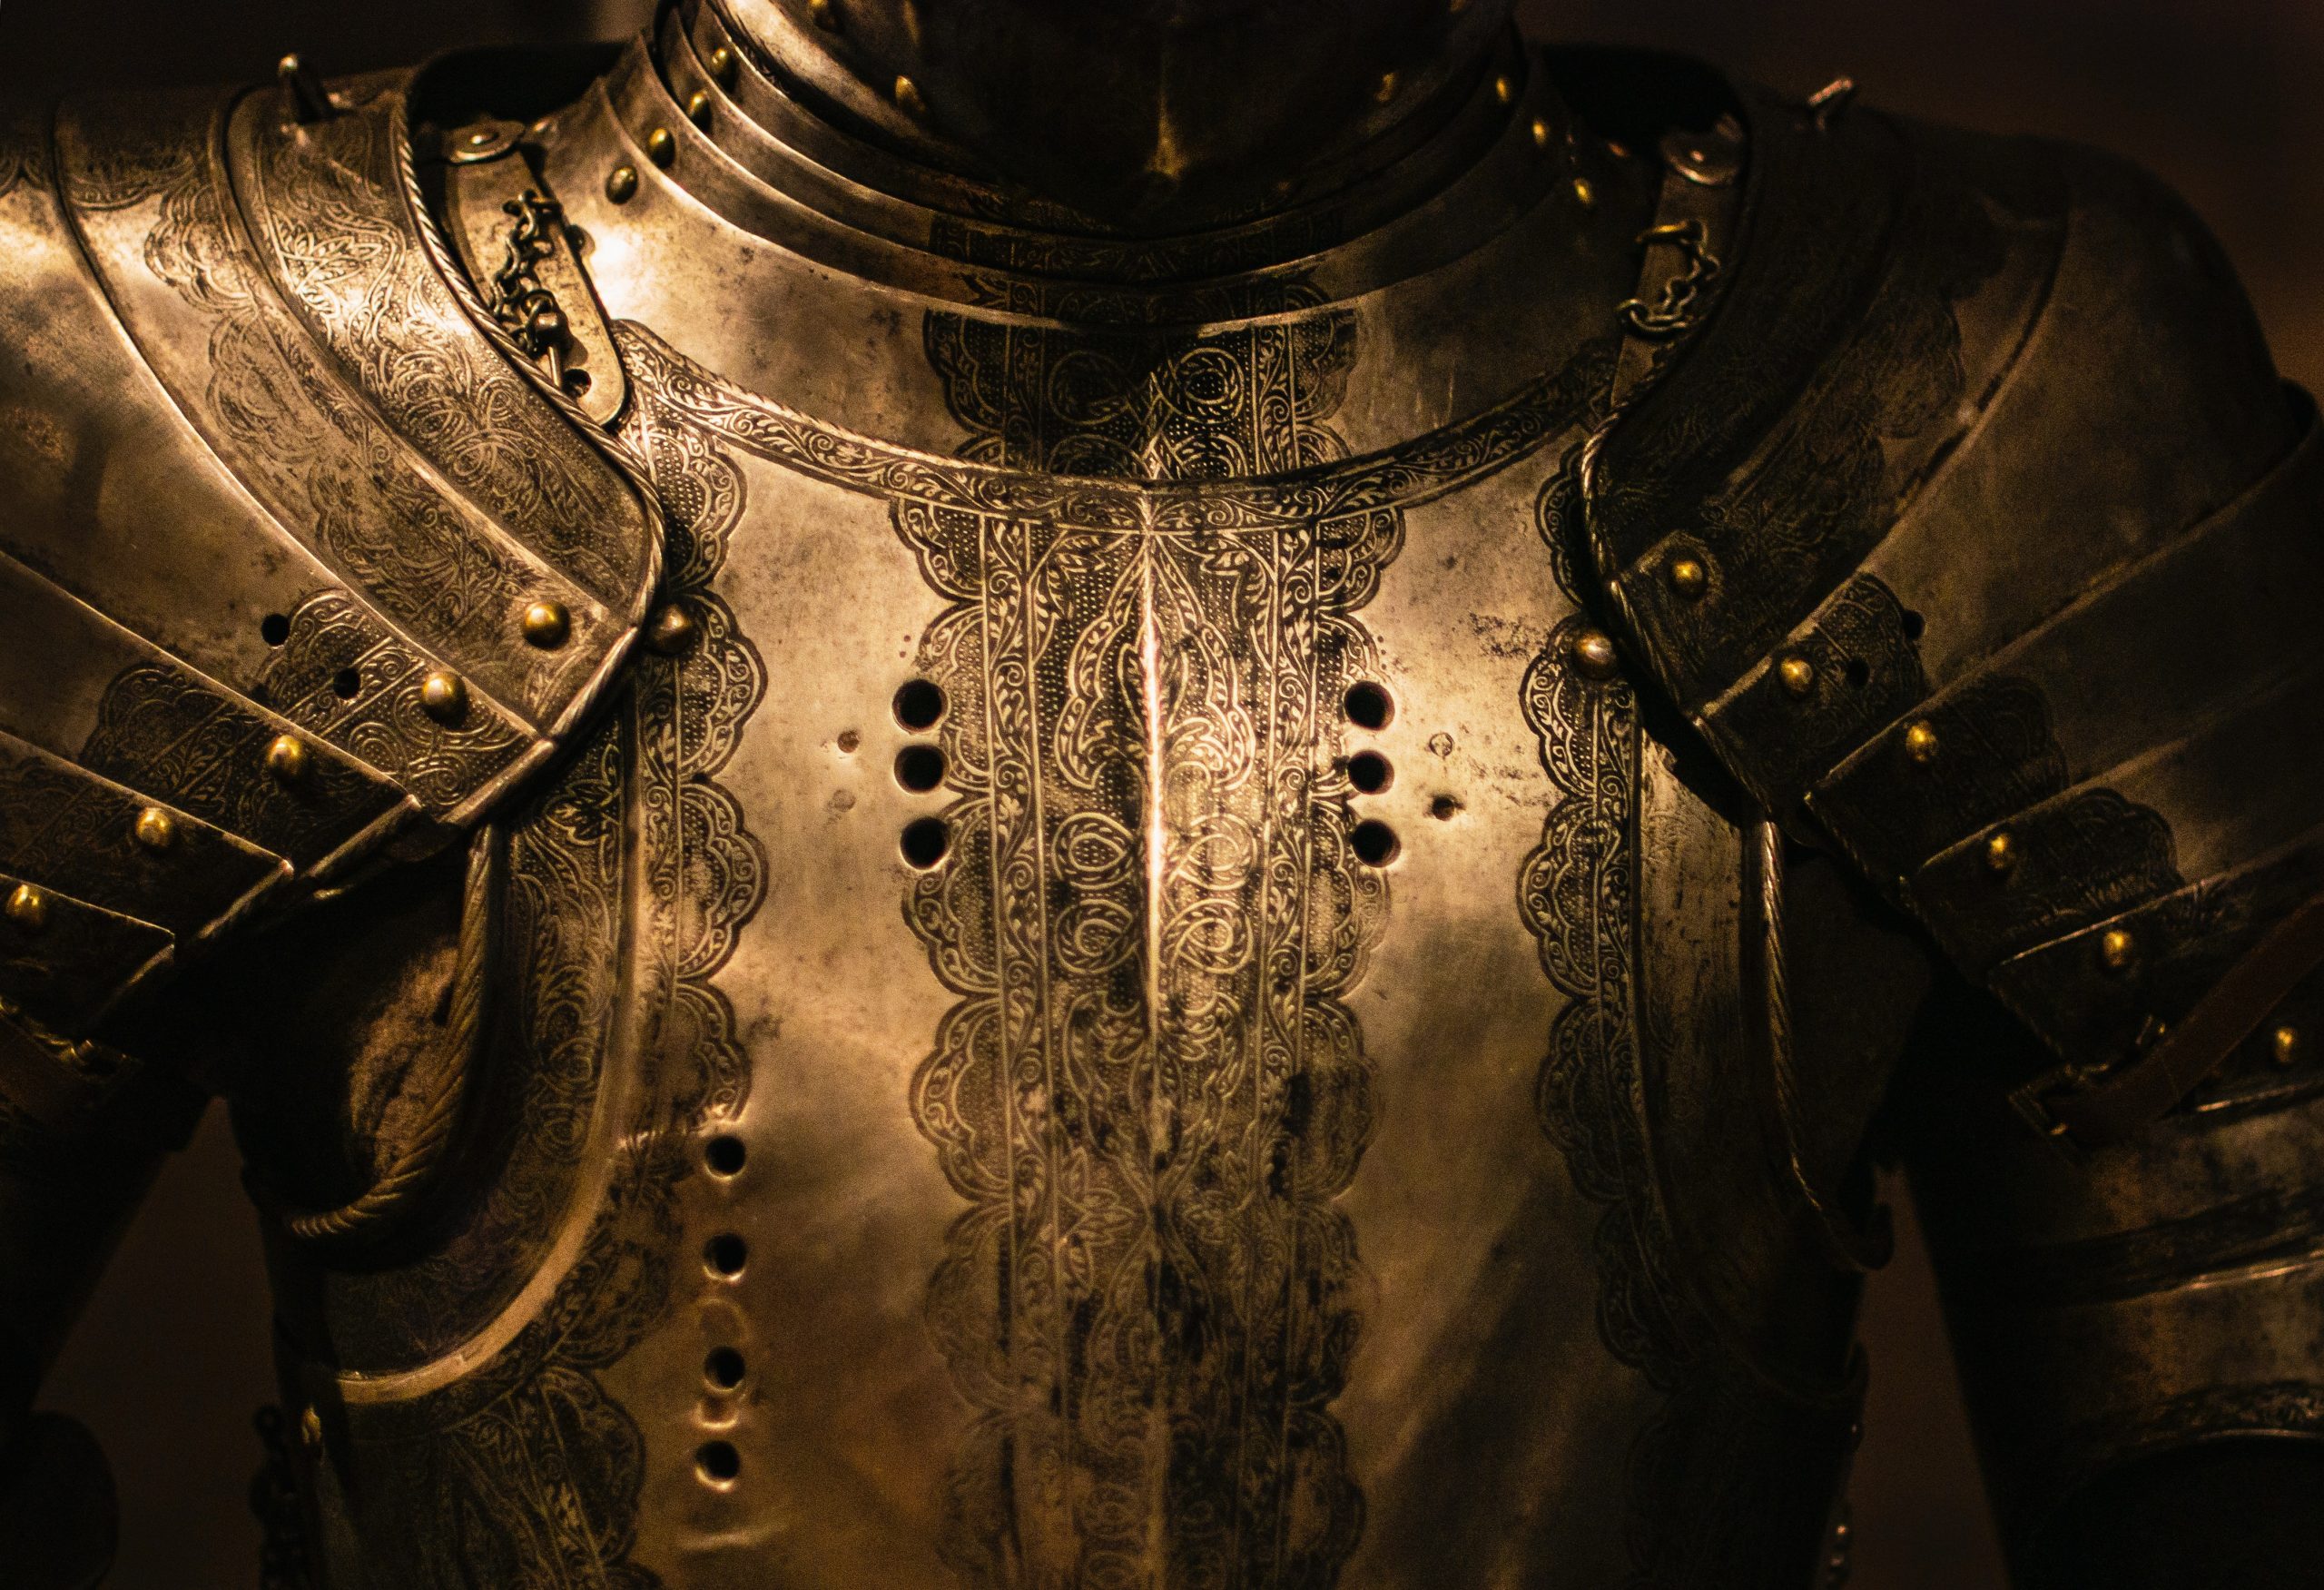 Chest Plate and Armor